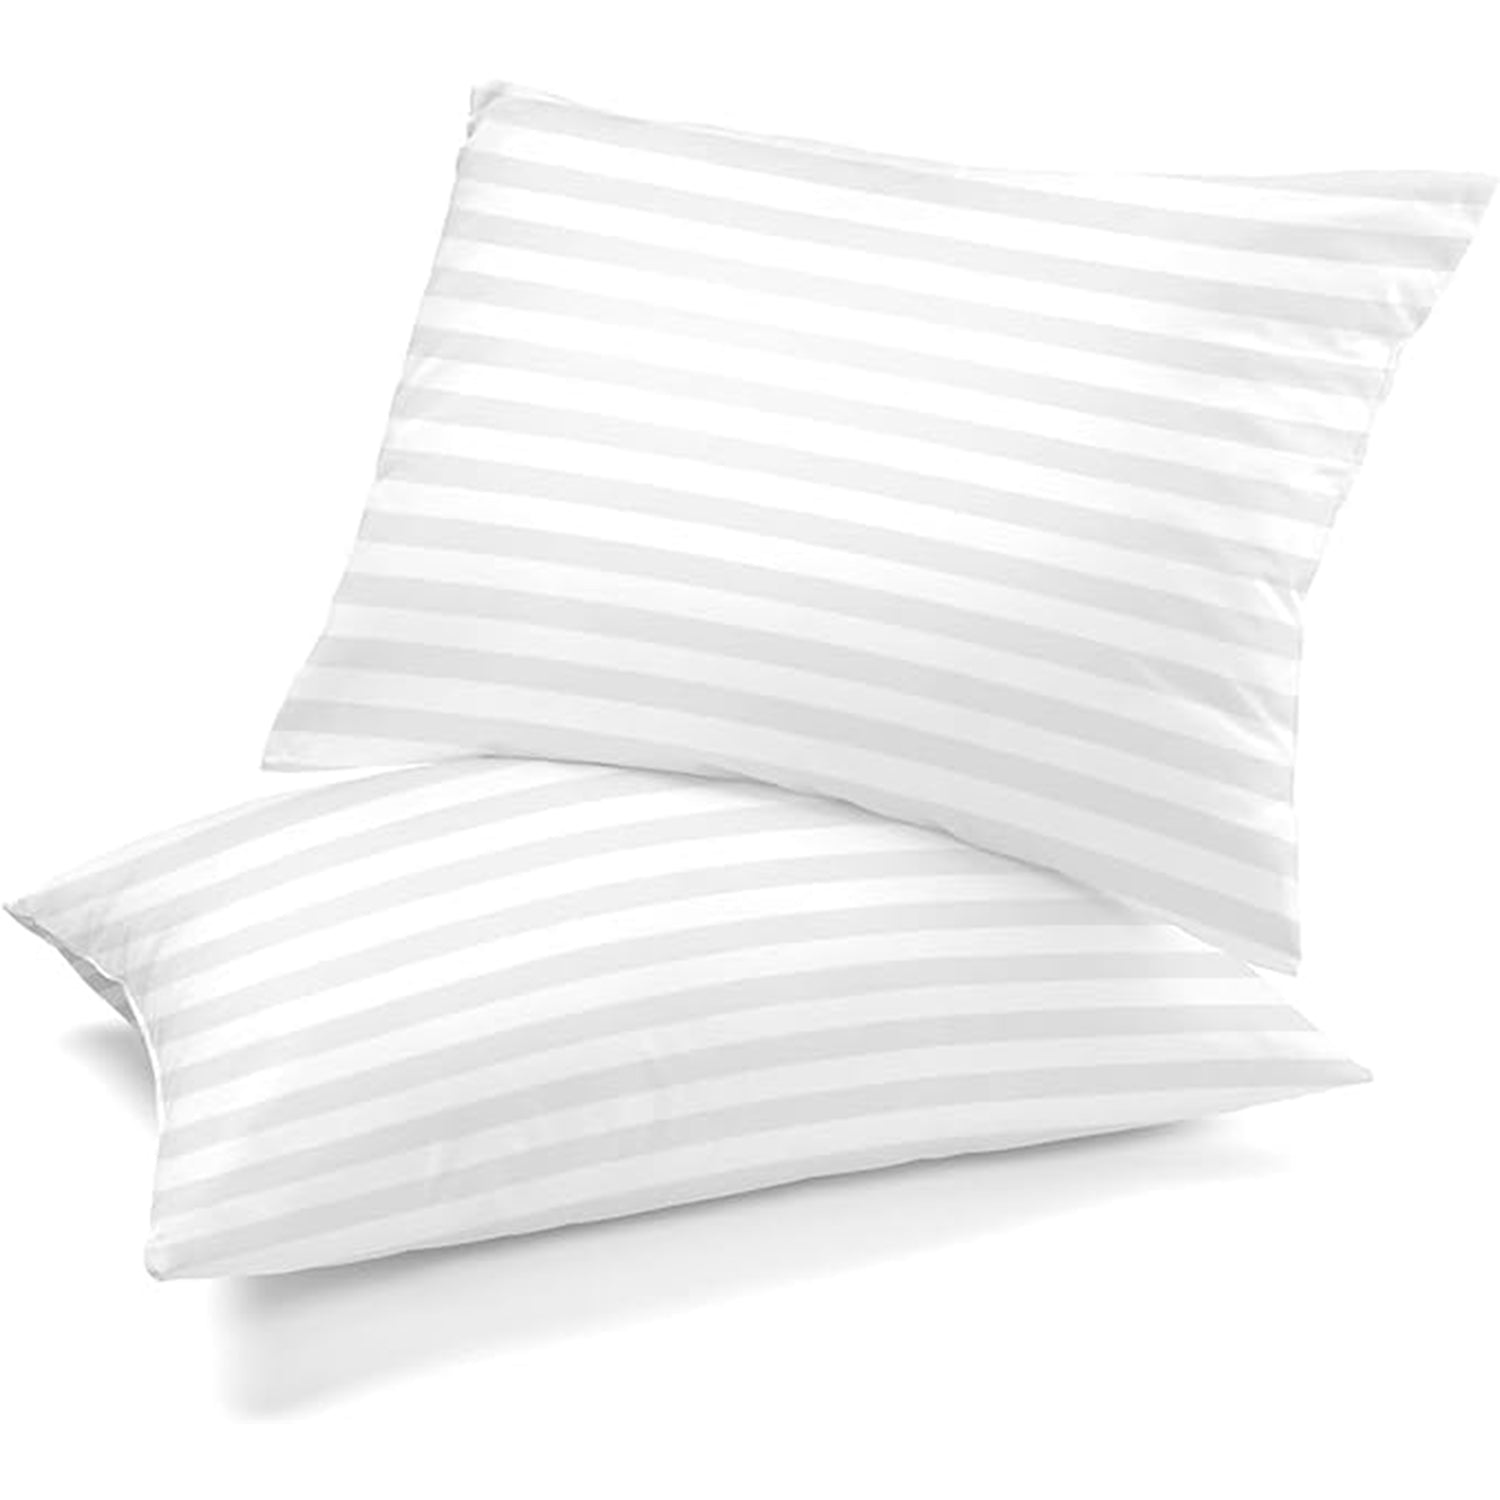 Strip Hotel Quality Pillow - Experience Luxurious Comfort